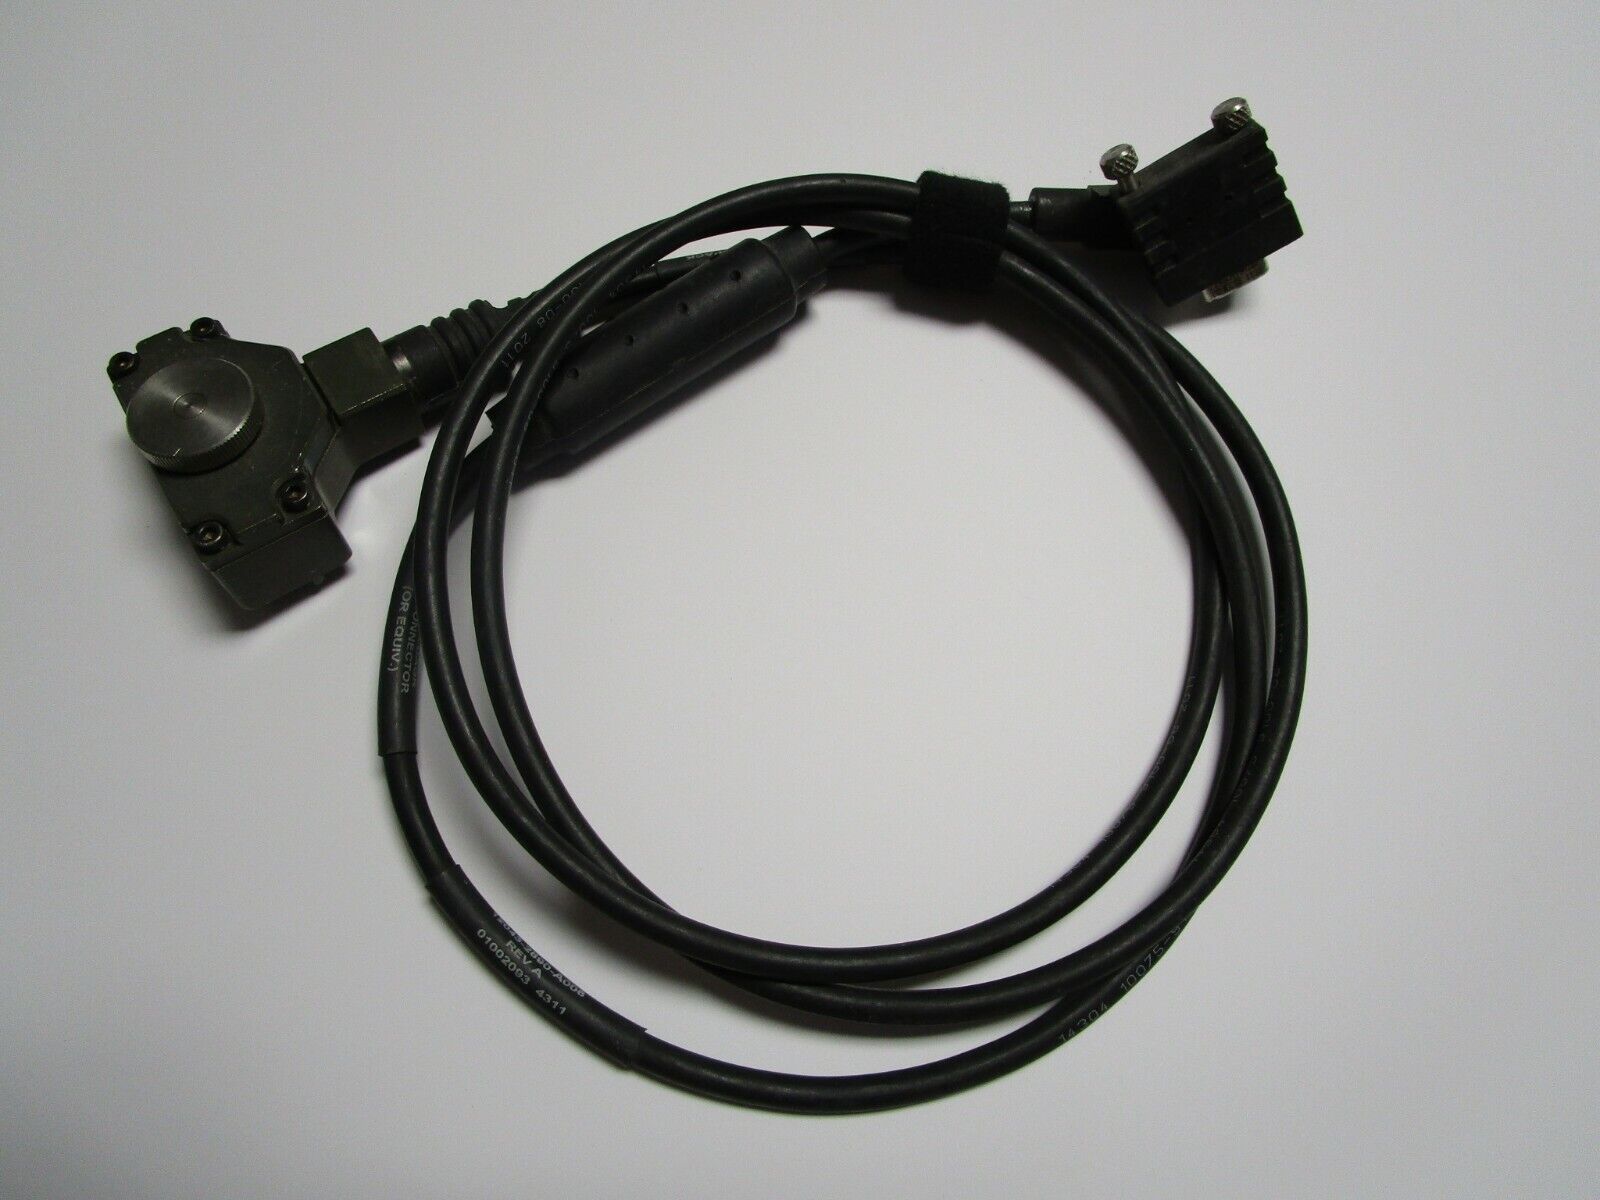 Falcon III Manpack Military Radio to plgr / dagr GPS Cable 12043-2760-A006